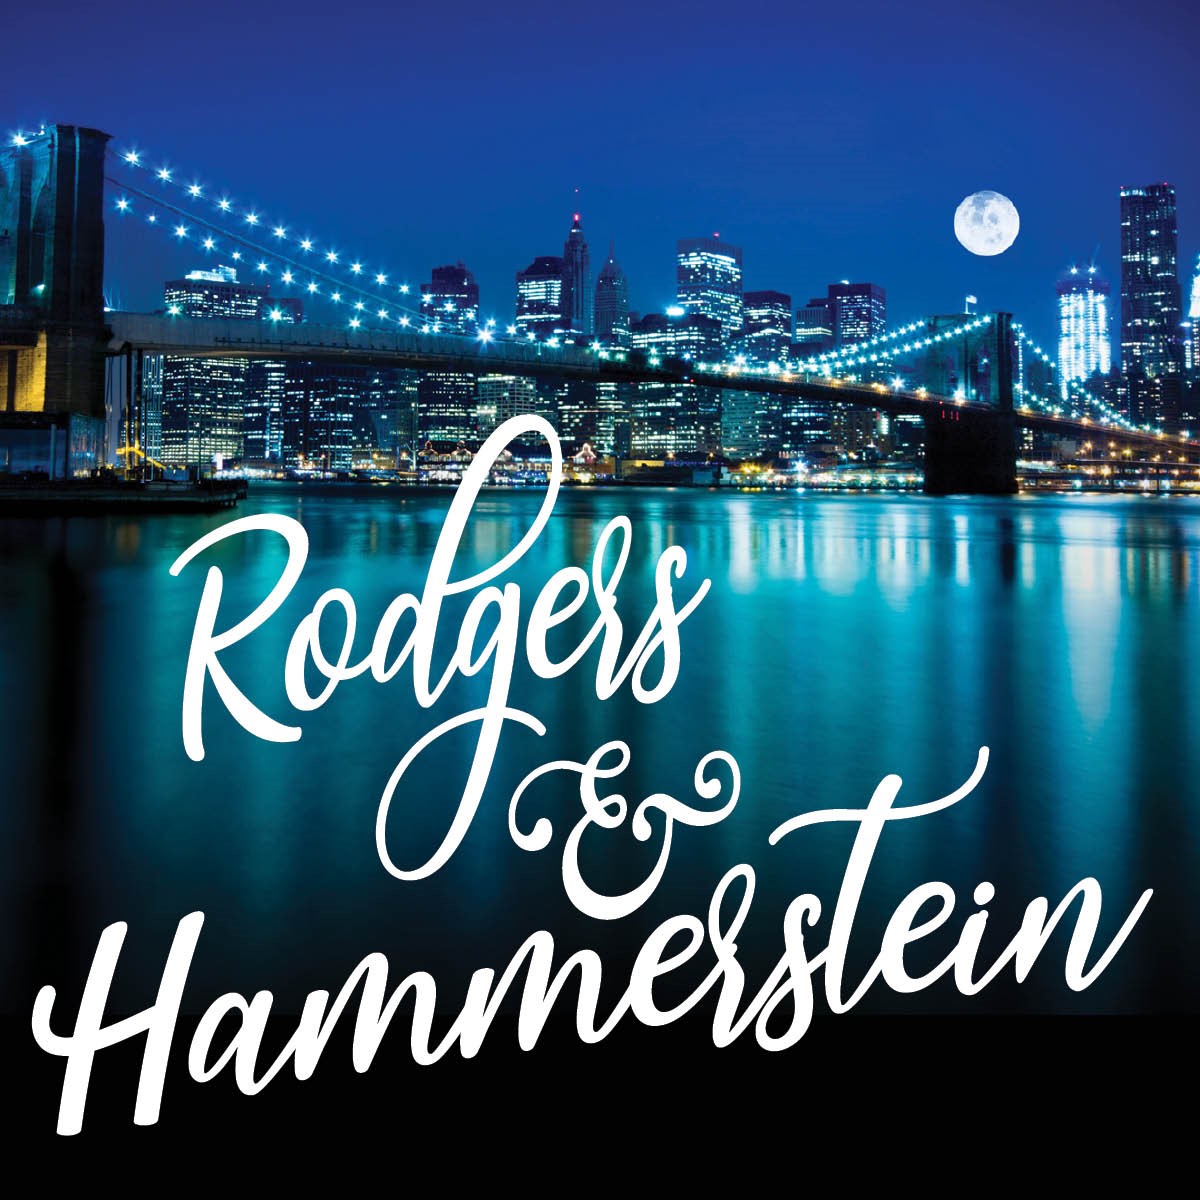 Image for Rodgers & Hammerstein